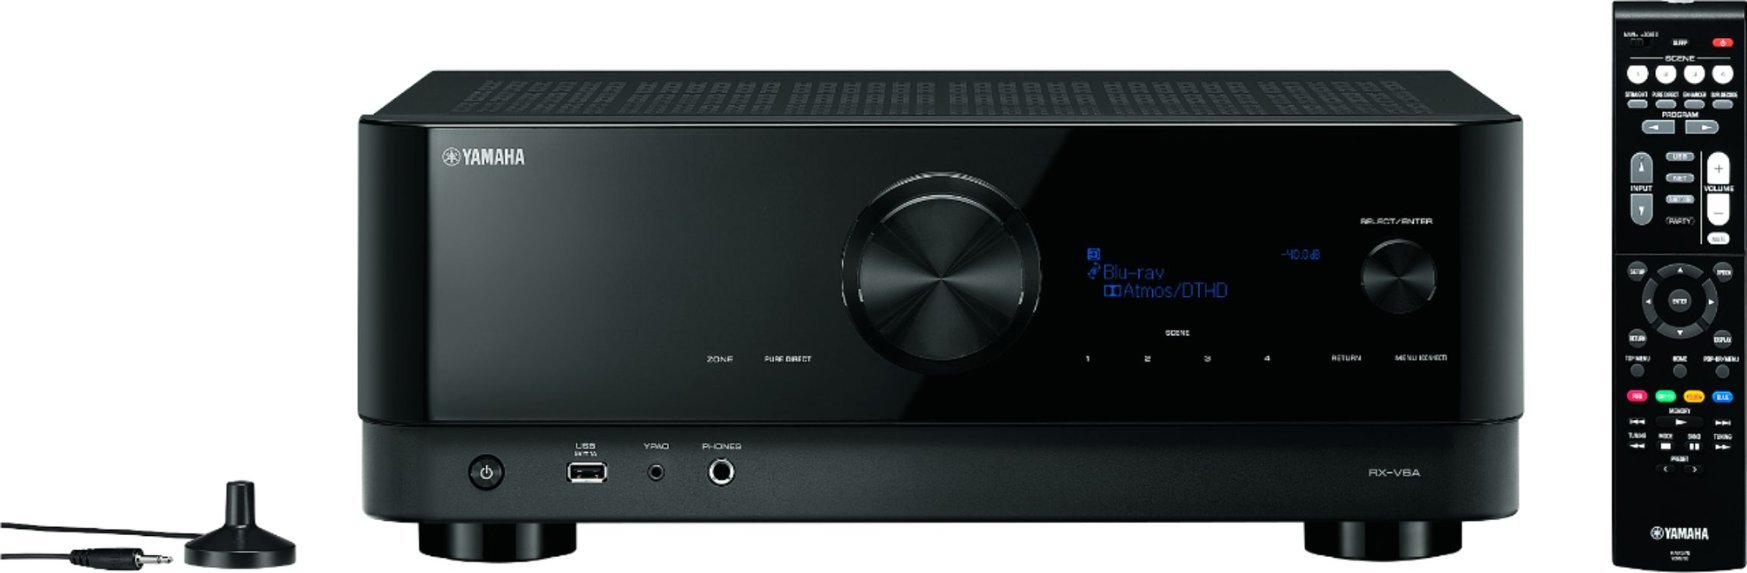 Yamaha RX-V6A 7.2 ch Receiver (Open Box Excellent) $435.99 @ Best Buy